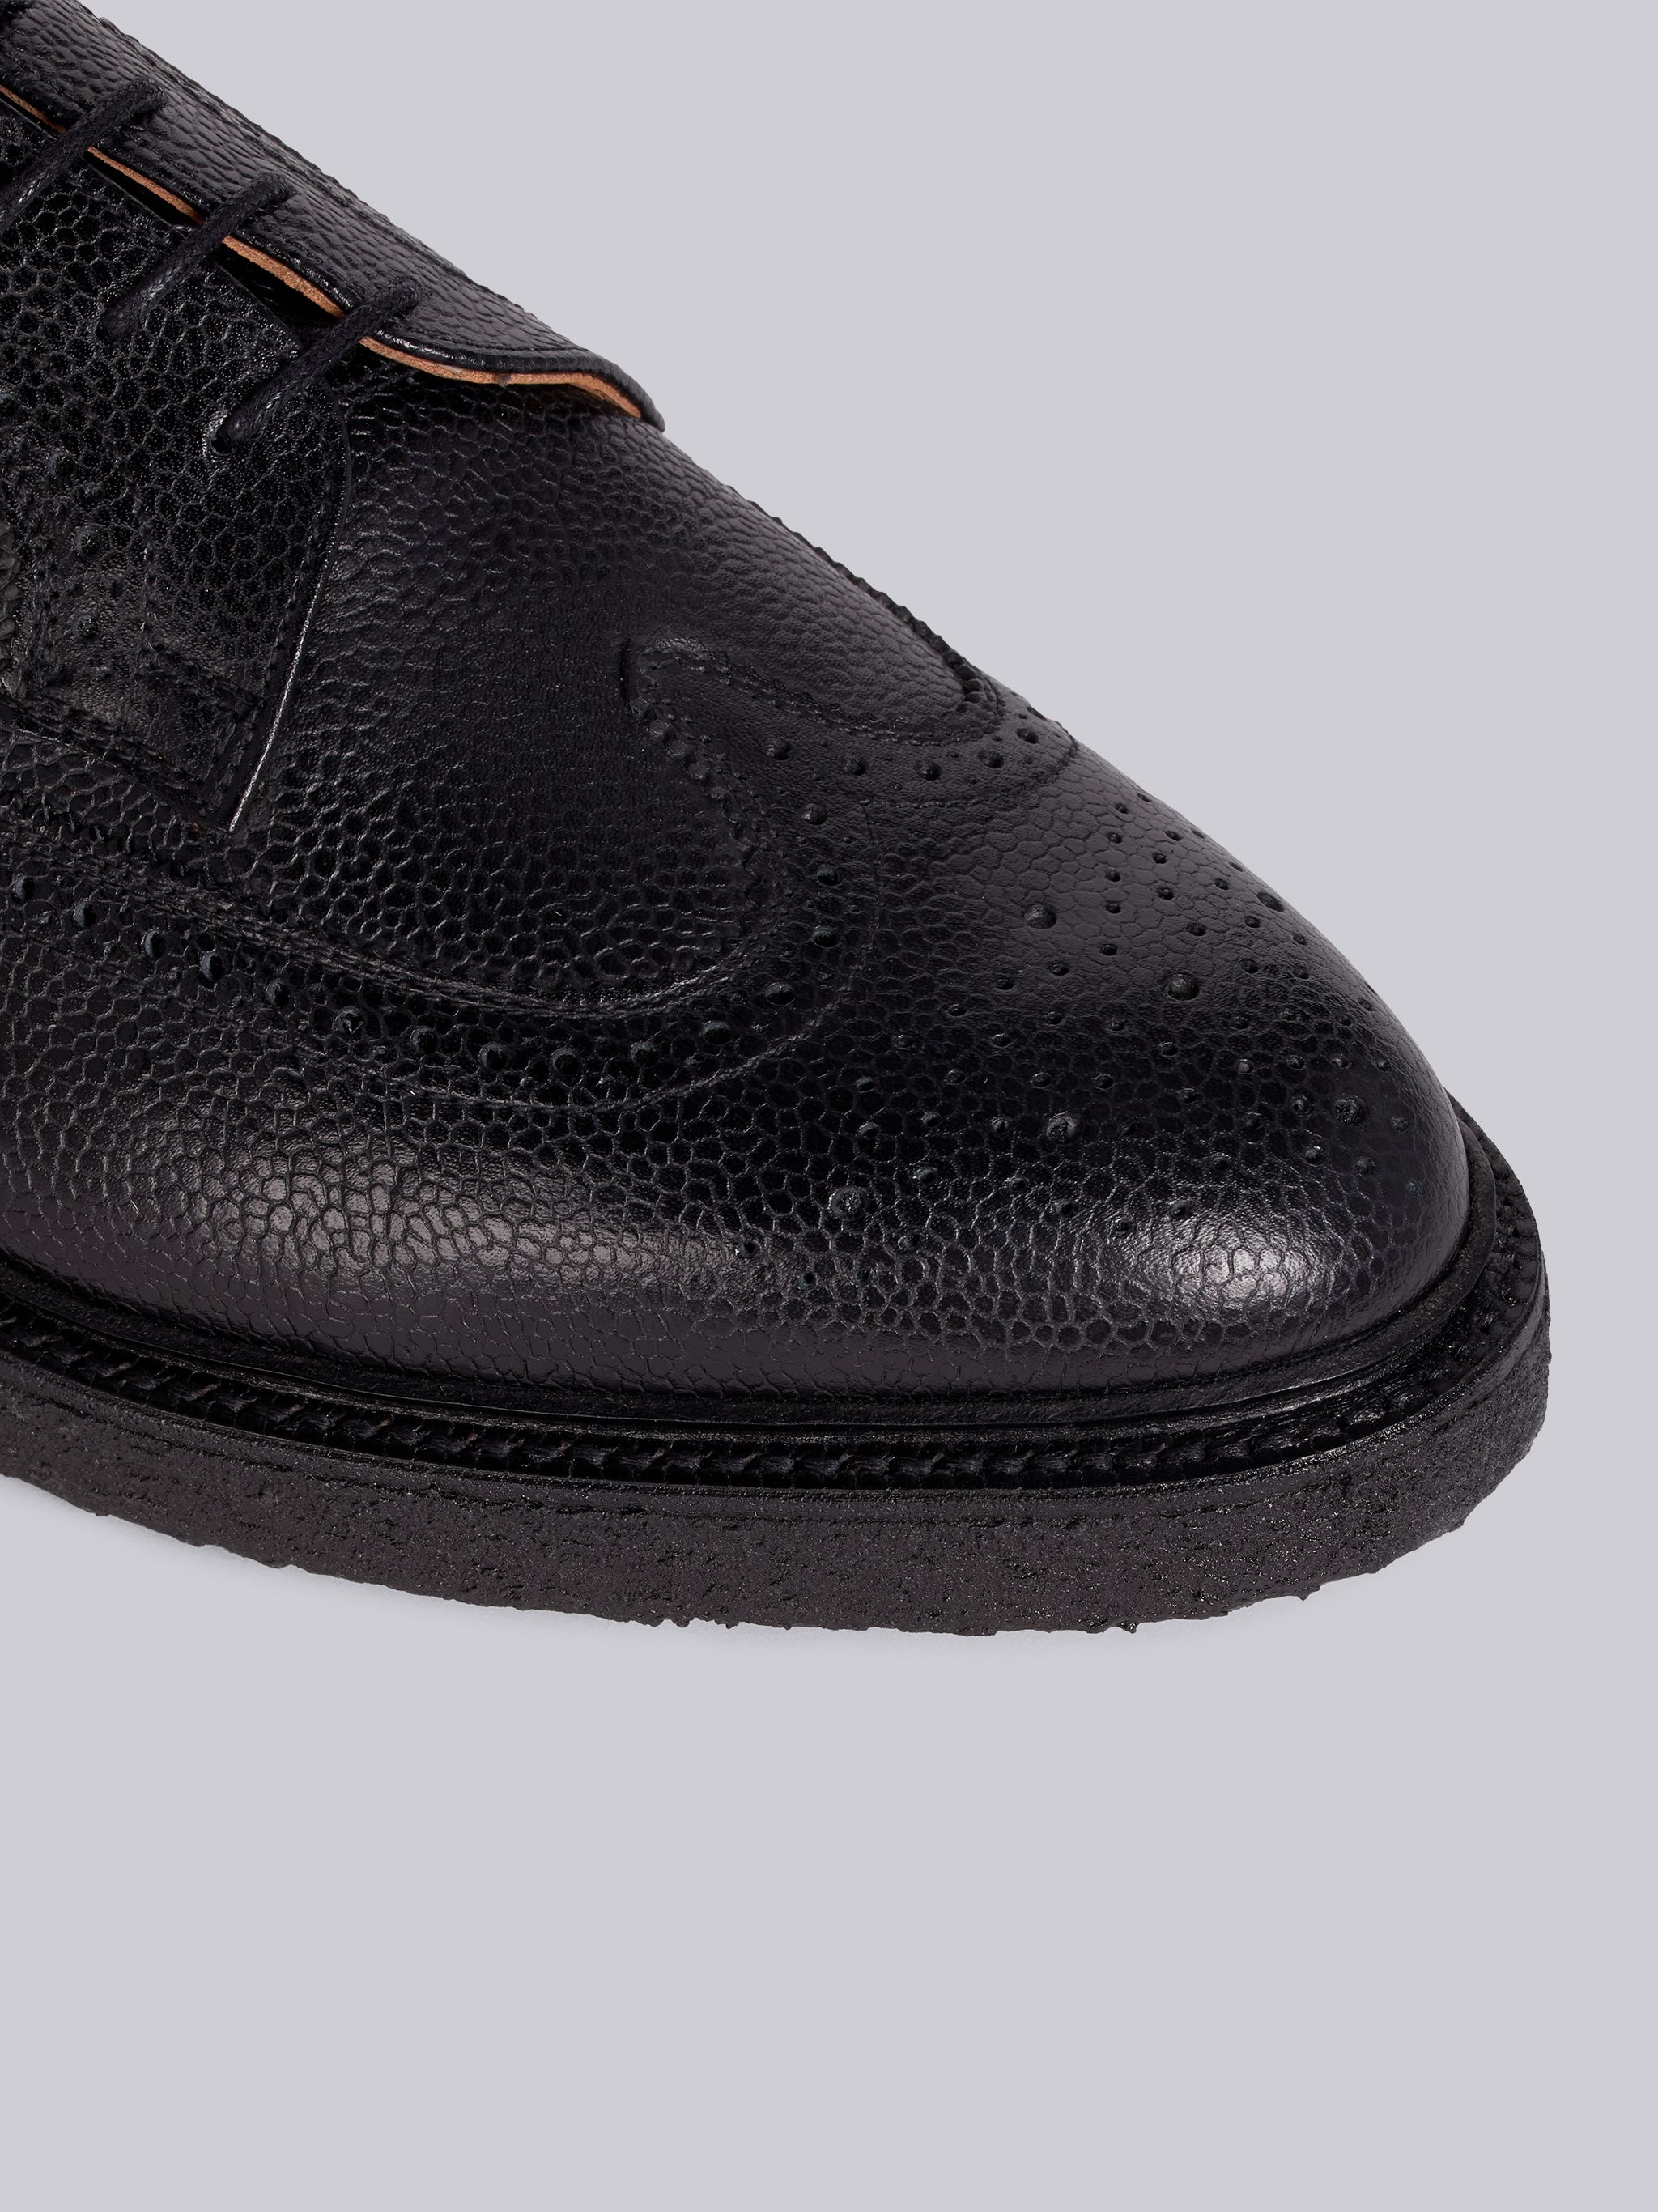 Longwing Brogues Shoes - 2